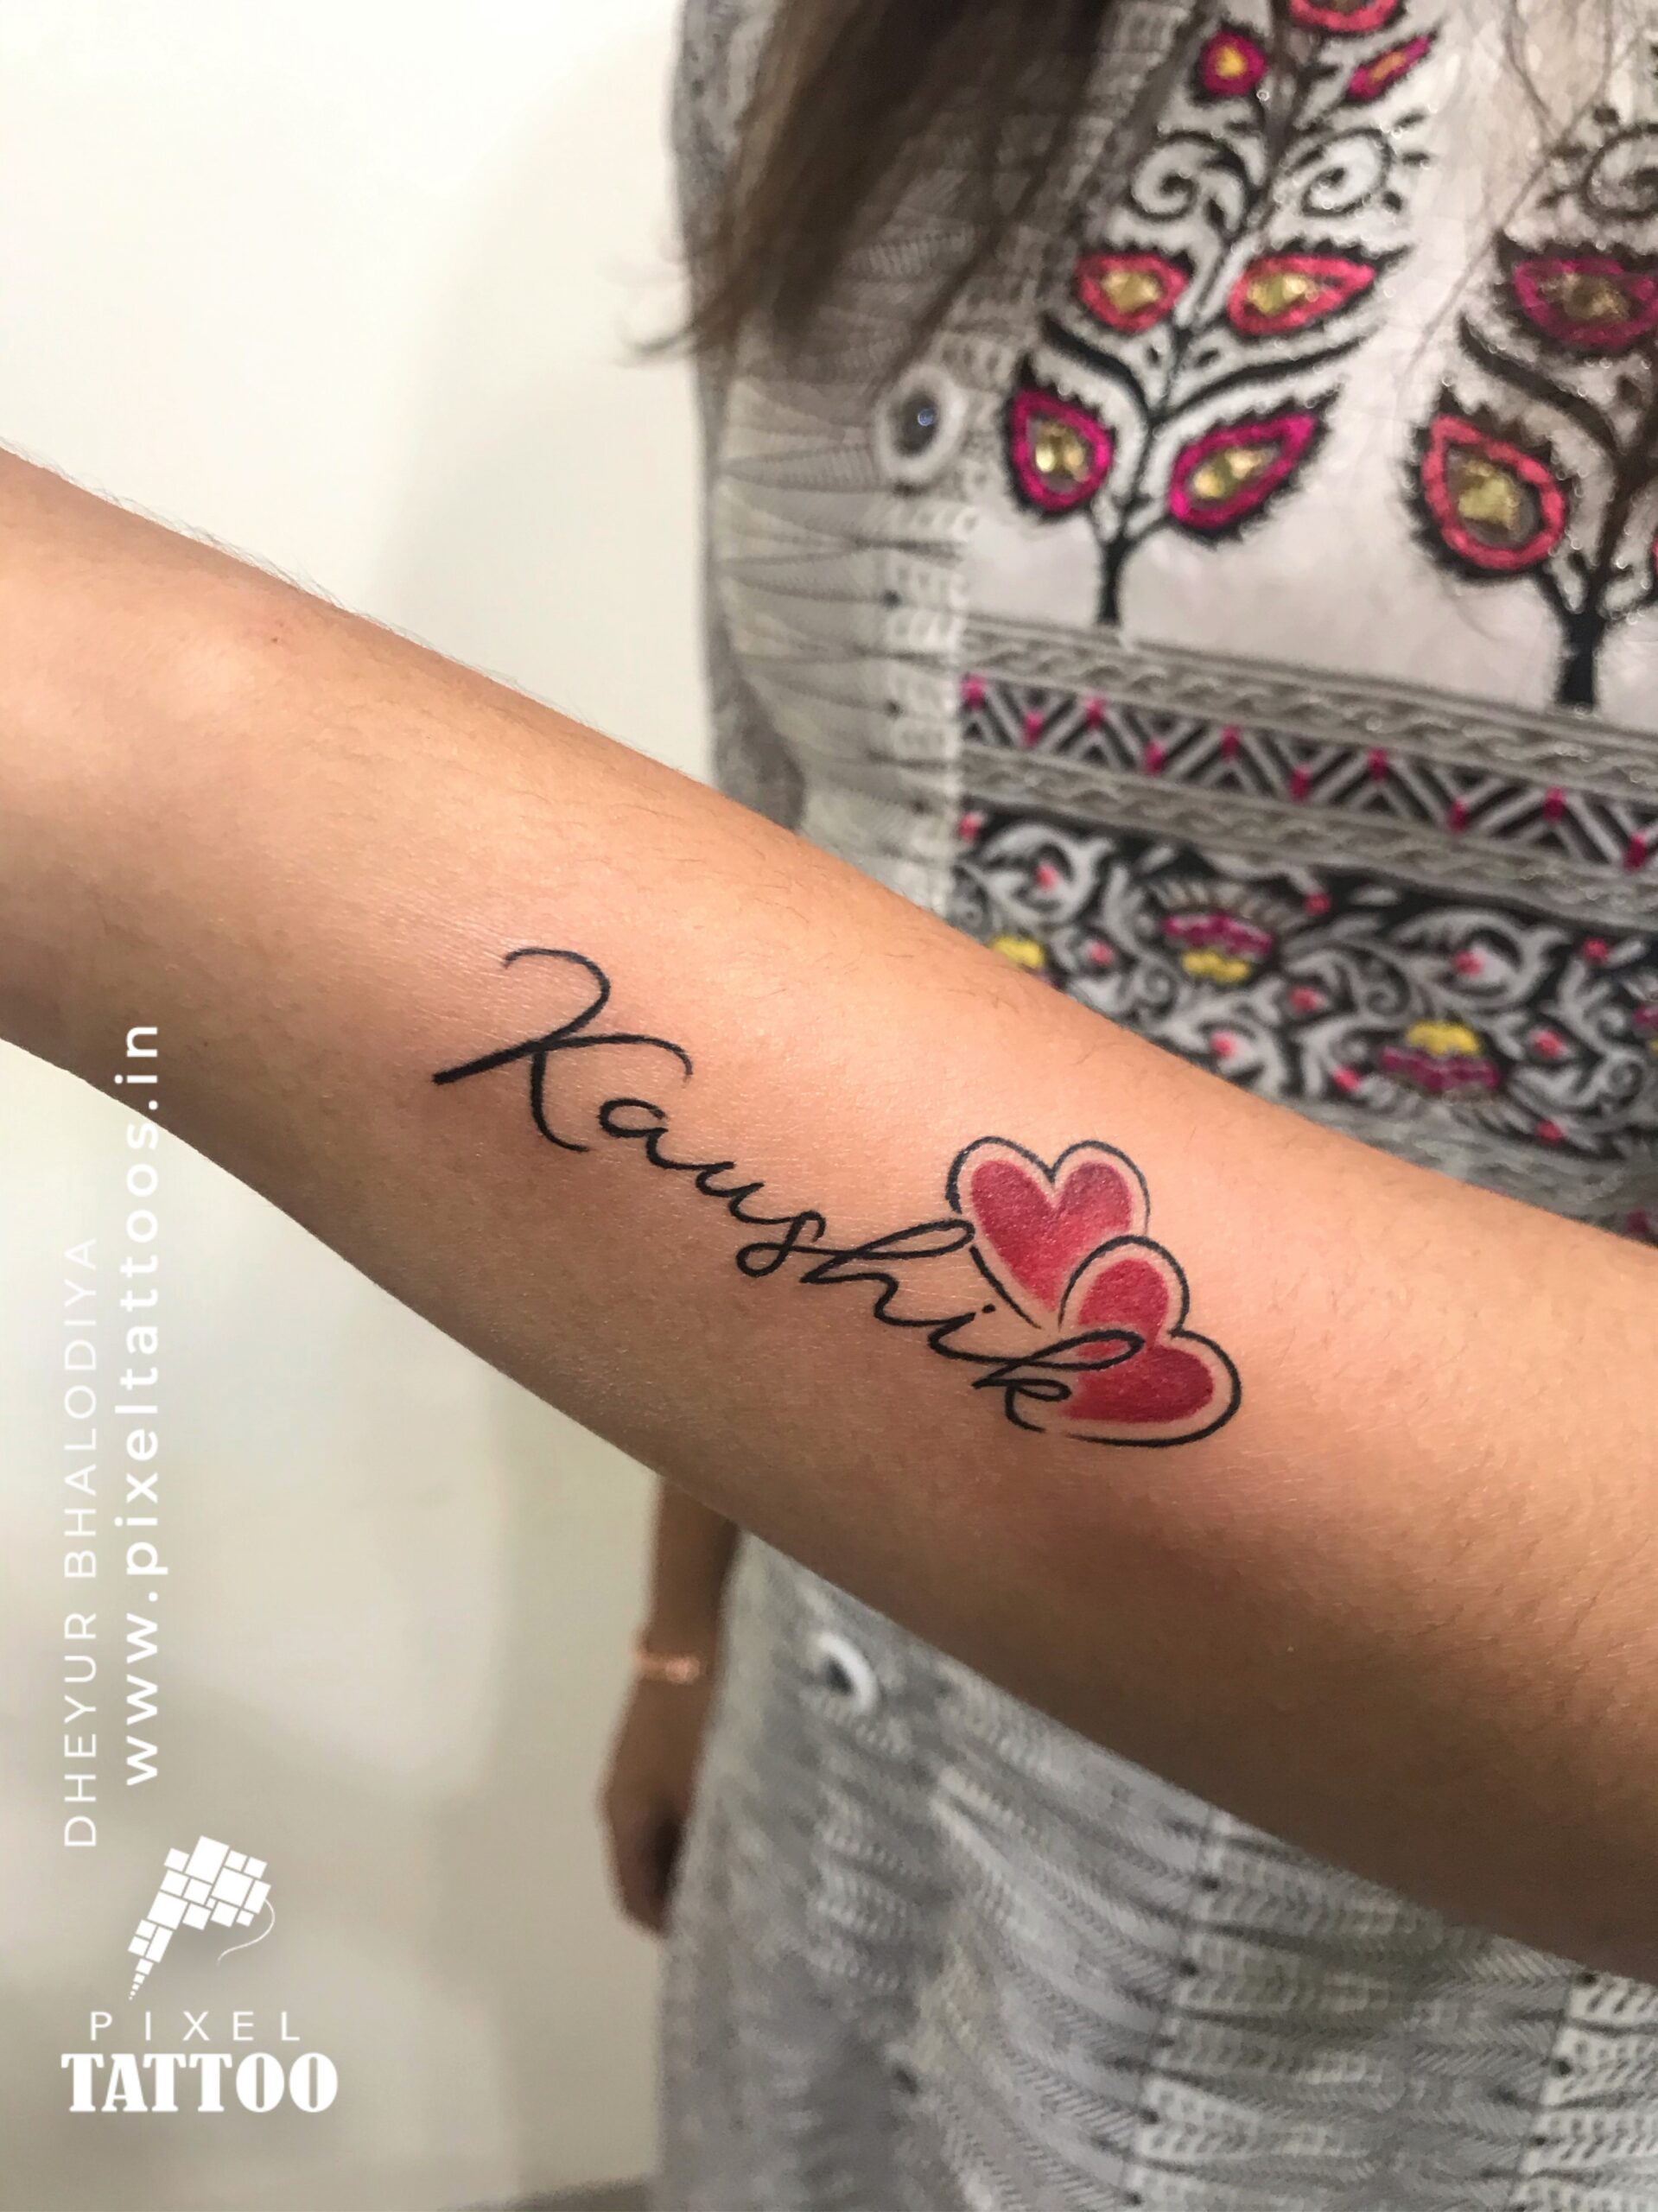 Small Tattoo Removal - Everything You Need to Know | Removery